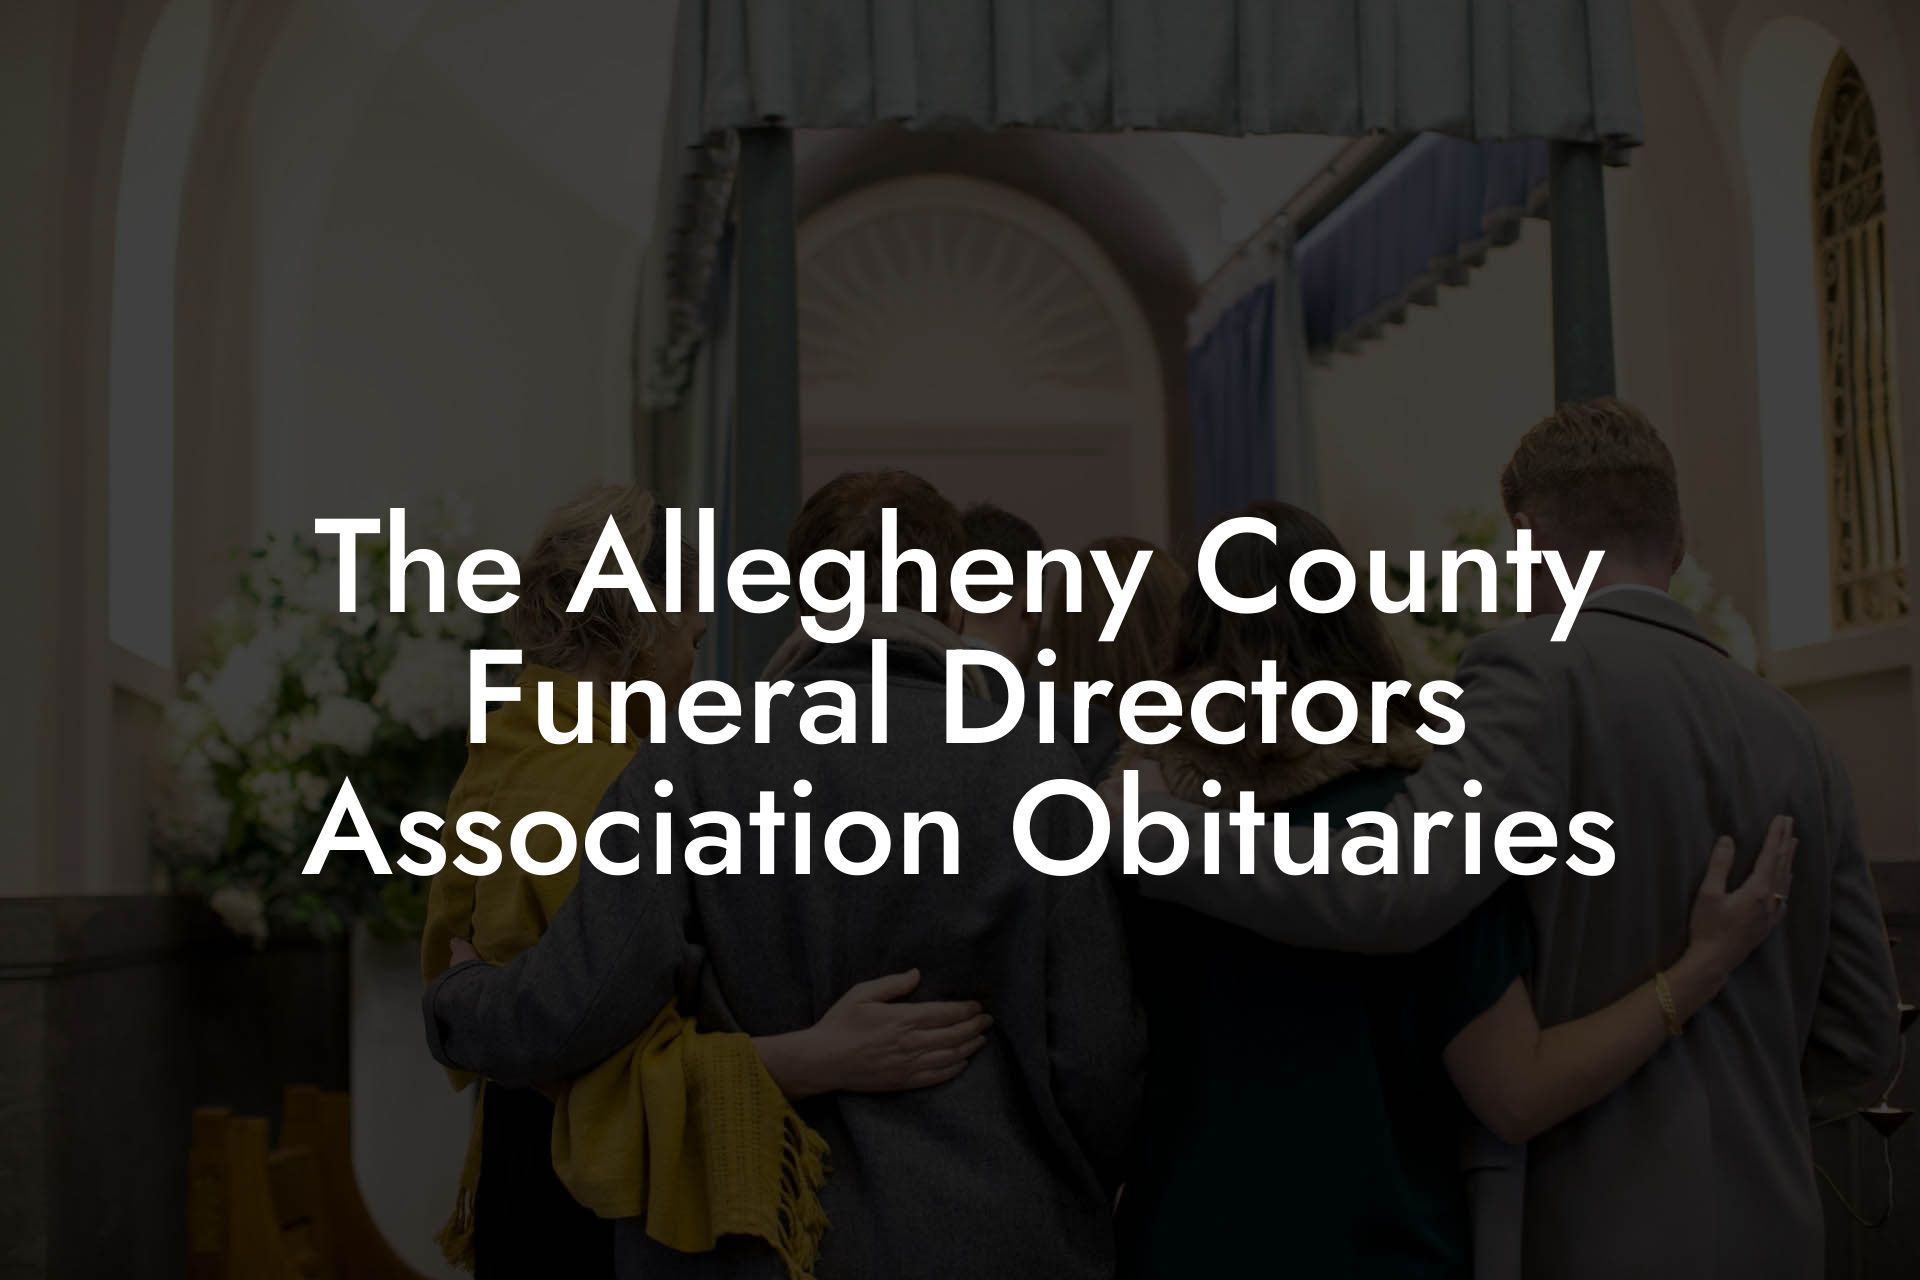 The Allegheny County Funeral Directors Association Obituaries